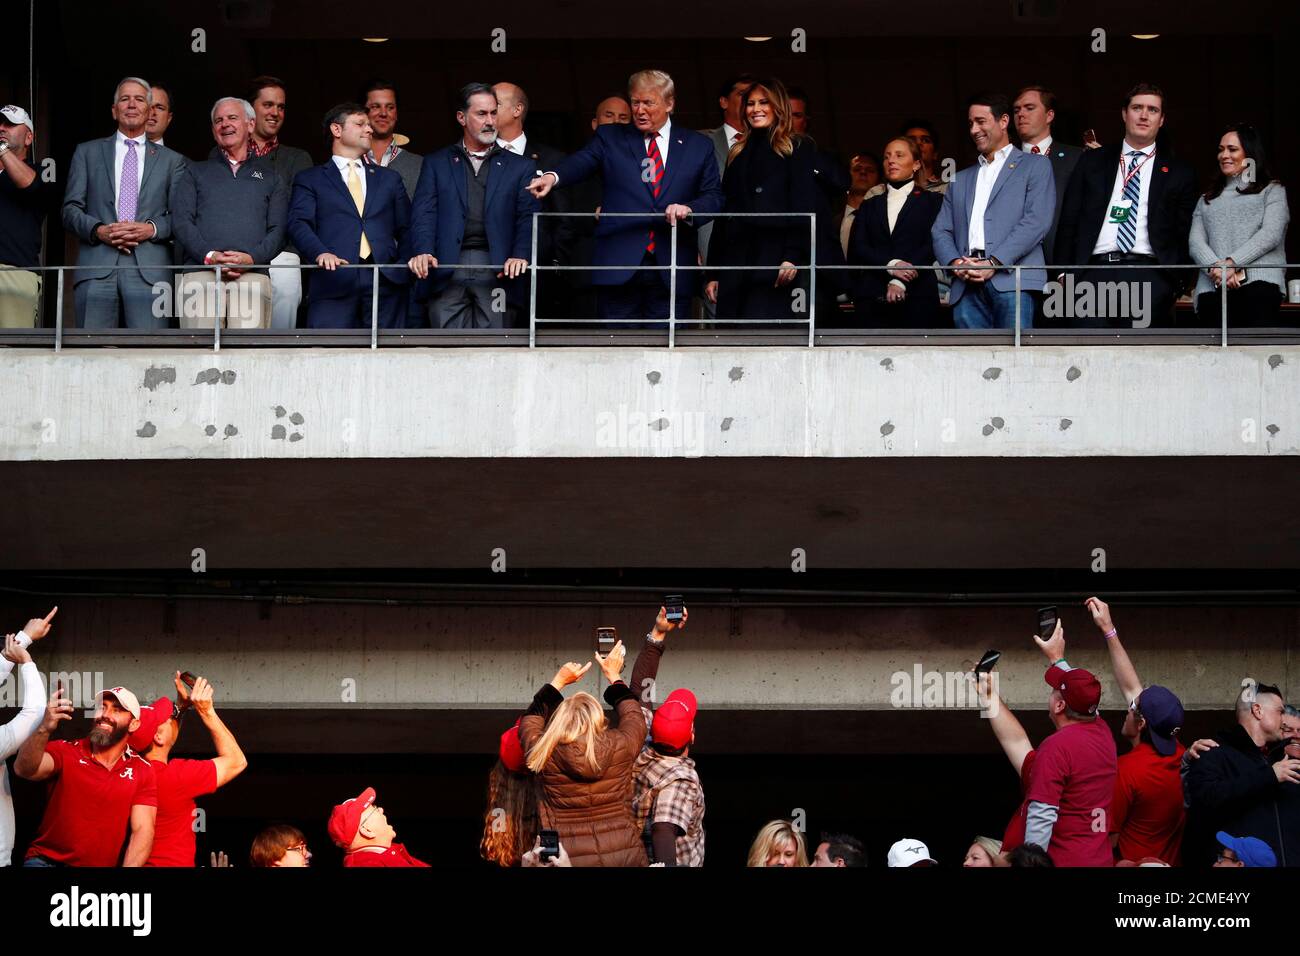 U.S. President Donald Trump and first lady Melania Trump react the crowd during the N.C.A.A. Division I college football game between Louisiana State University and University of Alabama at Bryant-Denny Stadium in Tuscaloosa, Alabama, U.S., November 9, 2019. REUTERS/Tom Brenner Stock Photo